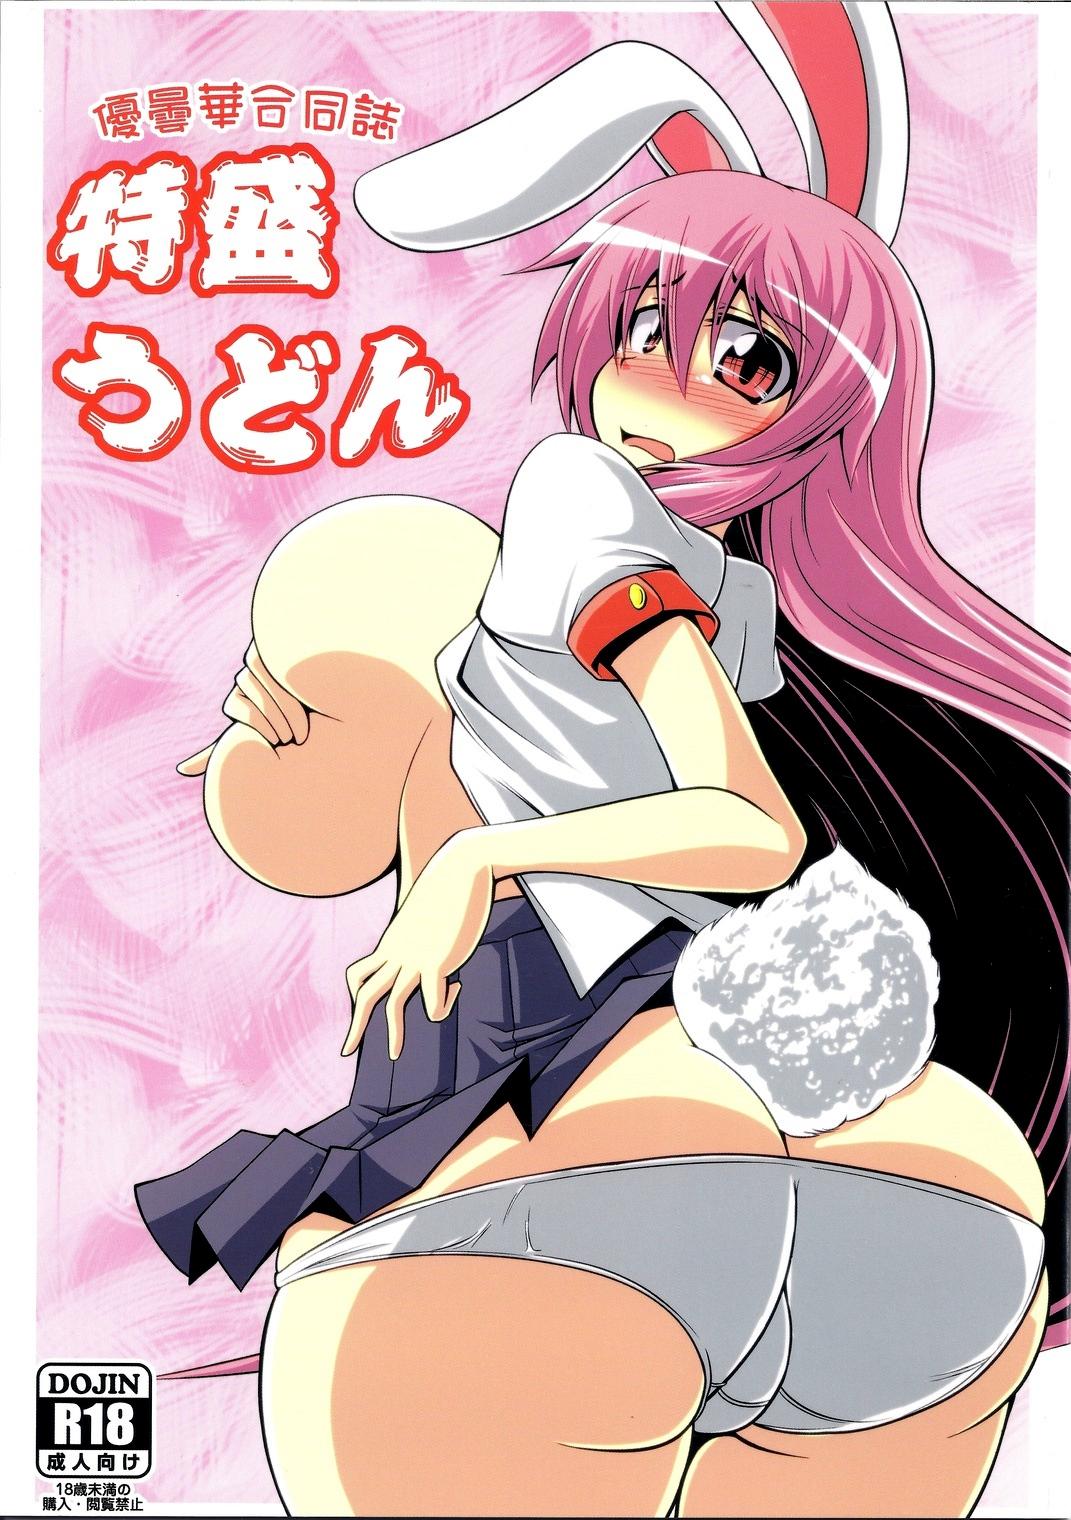 Home Udonge Goudoushi - Tokumori Udon - Touhou project T Girl - Picture 1